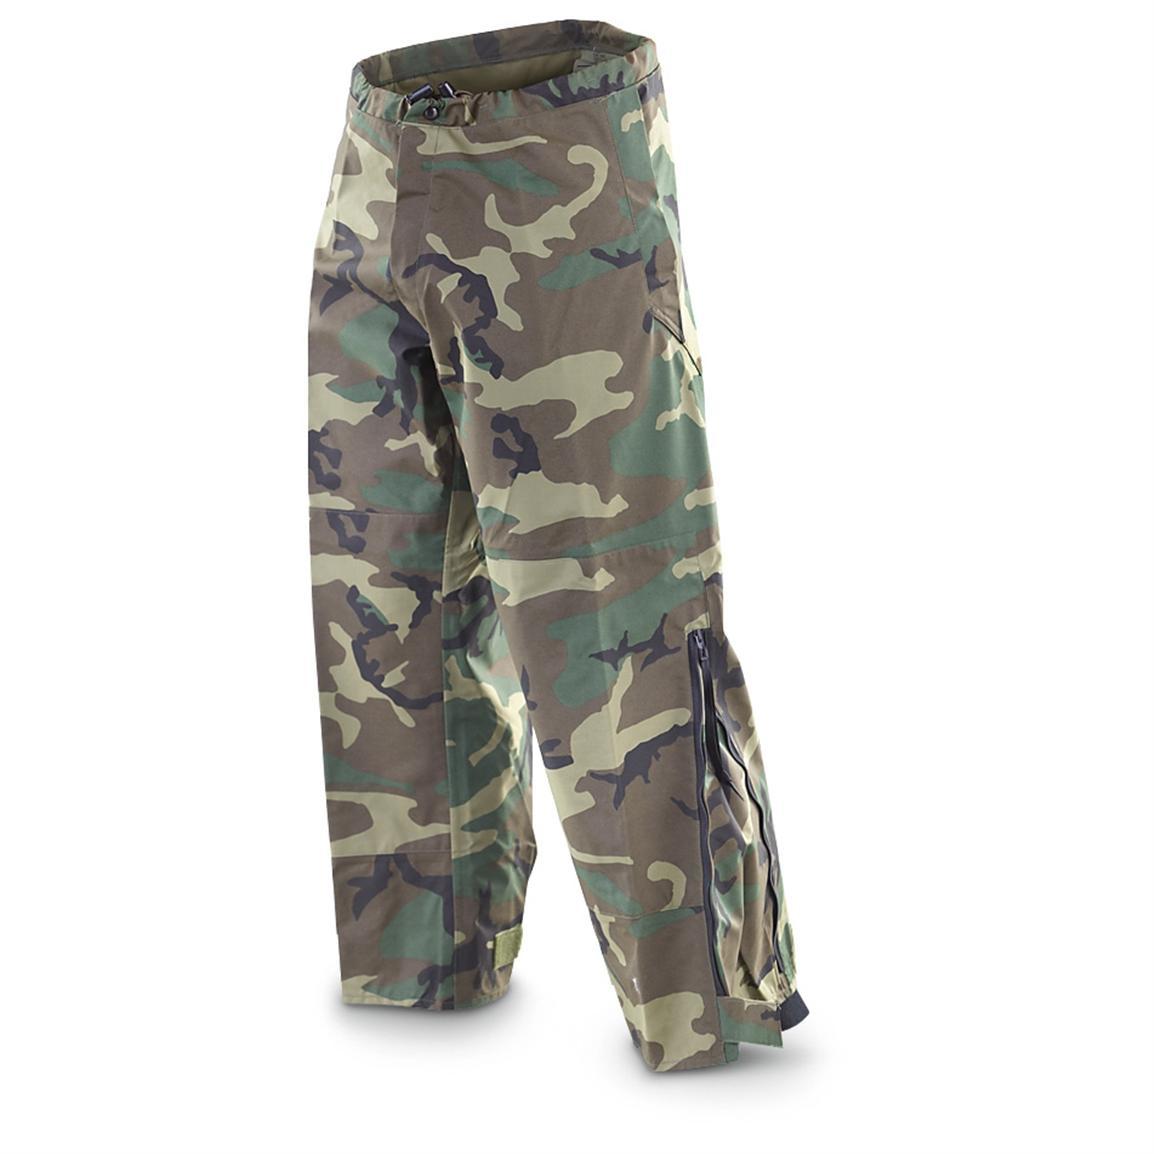 US Military GEN III ECWCS, LEVEL VII: EXTREME COLD TROUSERS, (Unissued)  Large. - Frontier Firearms & Army Surplus